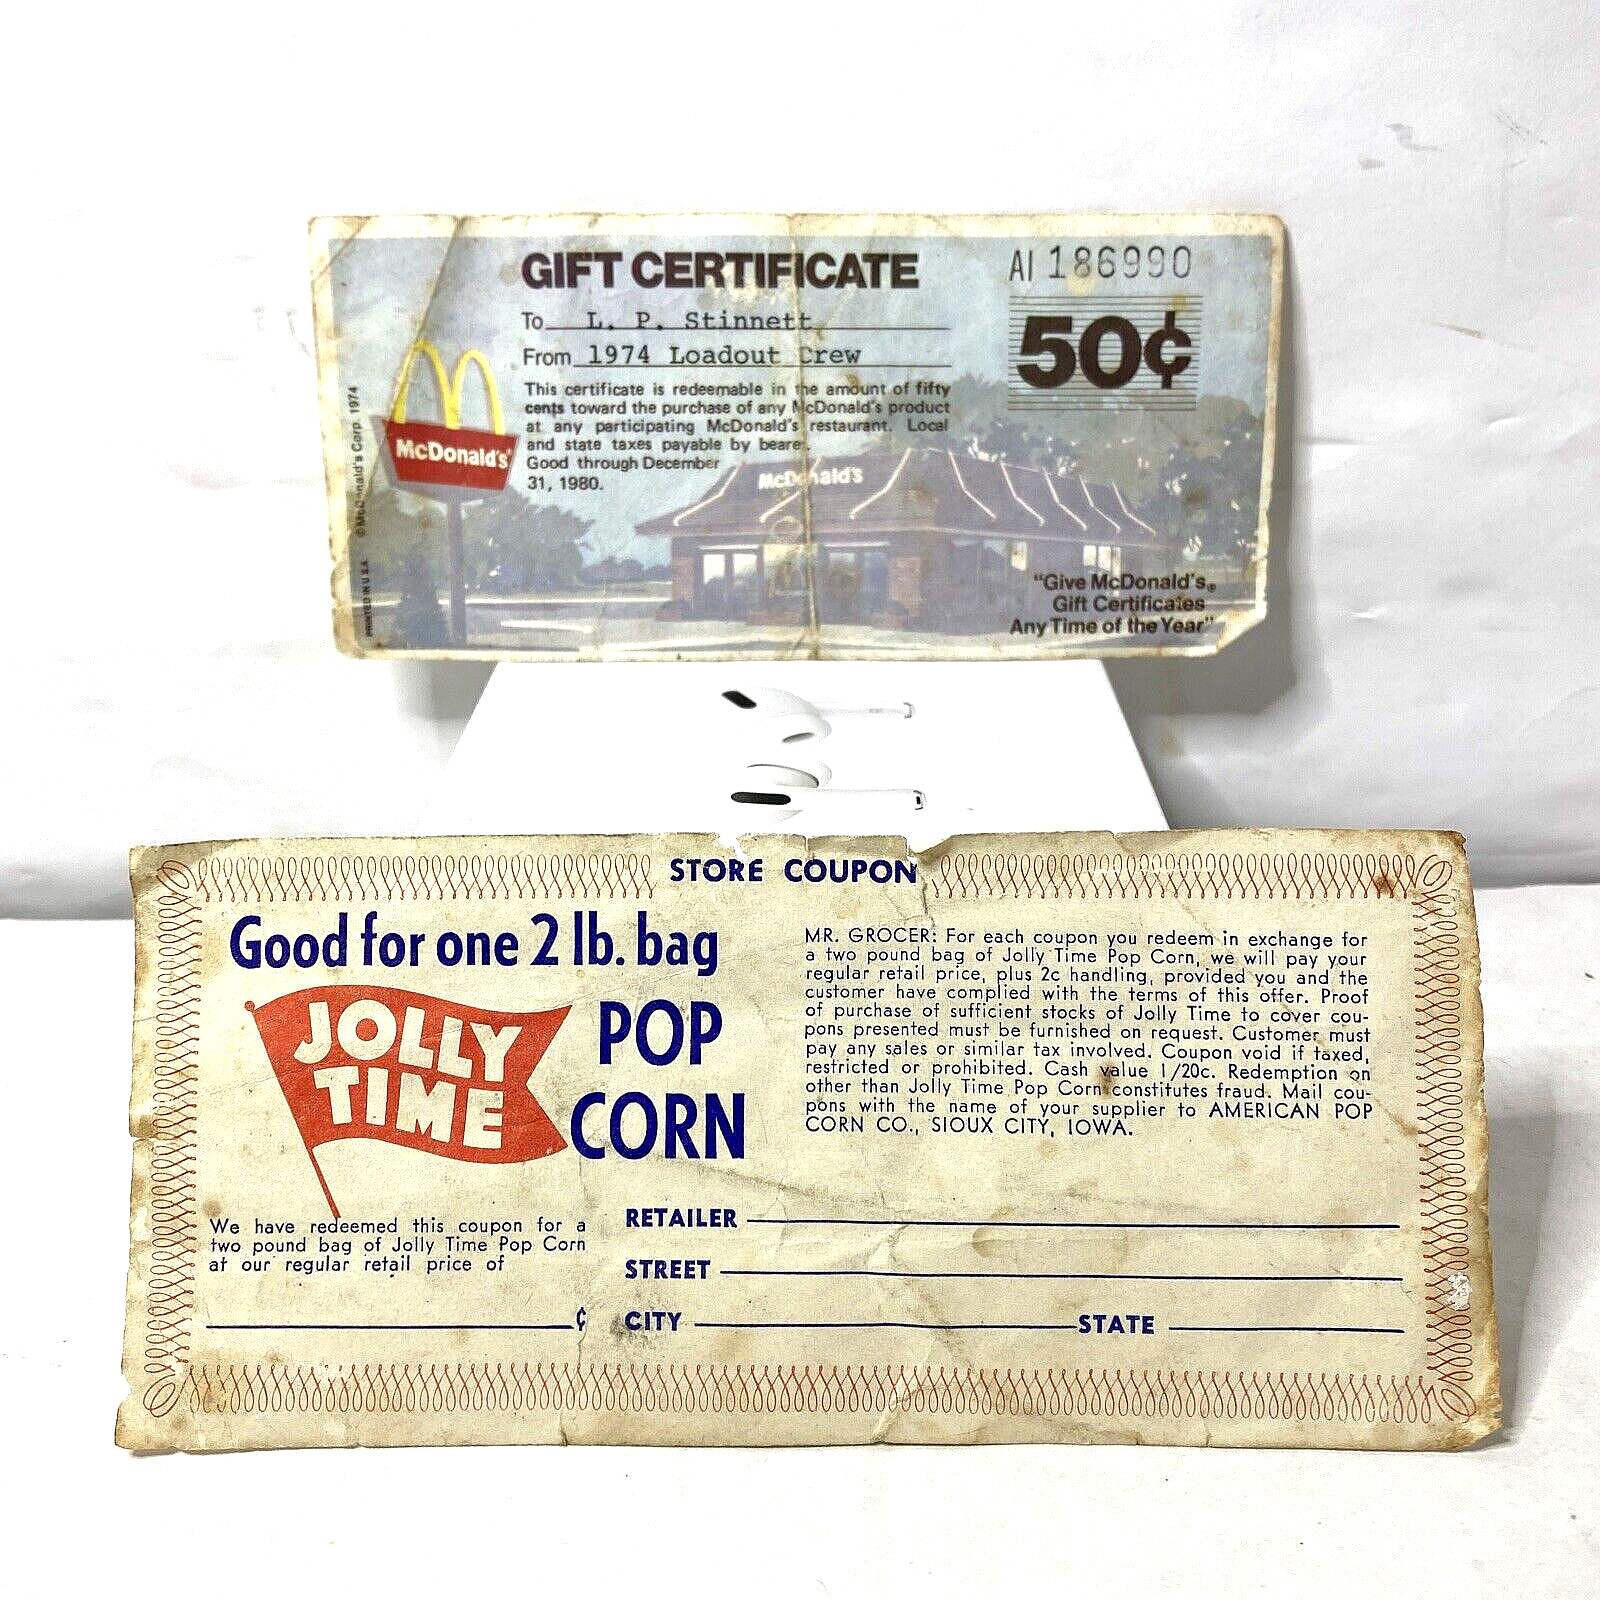 Vintage 1974 Mcdonalds 50 Cent Gift Certificate and Jolly time coupon